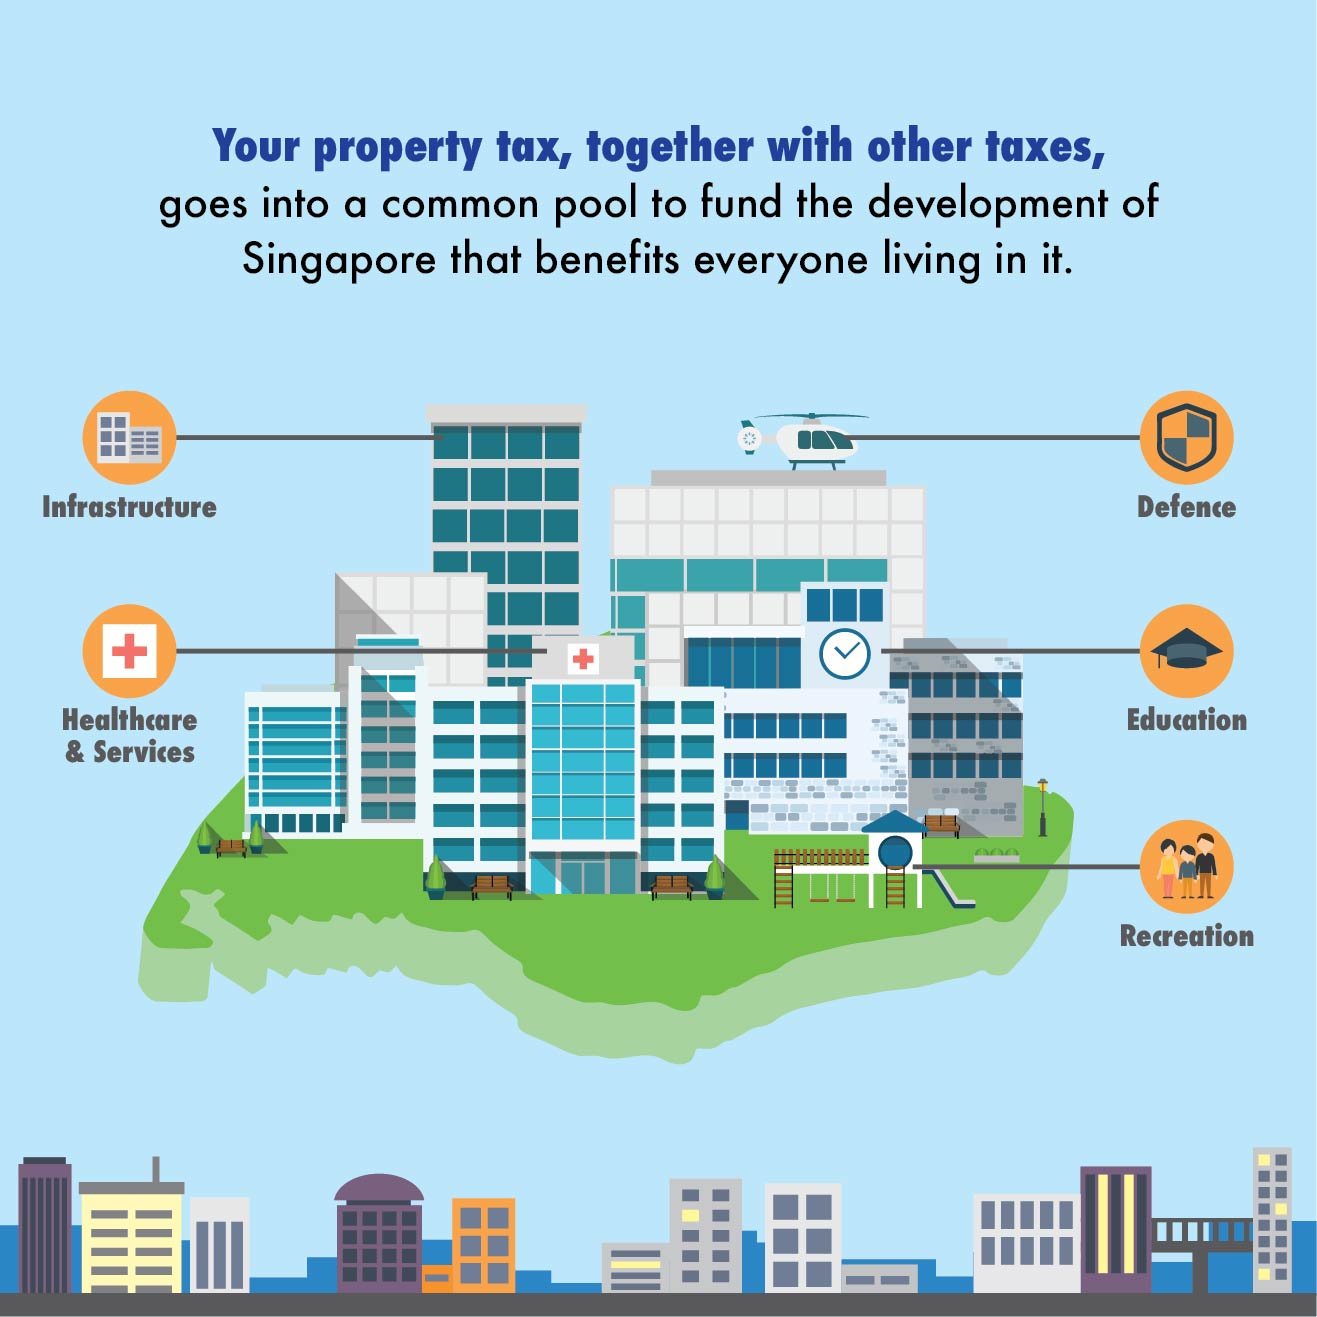 Your property tax, together with other taxes, goes into a common pool to fund the development of Singapore that benefits everyone living in it.